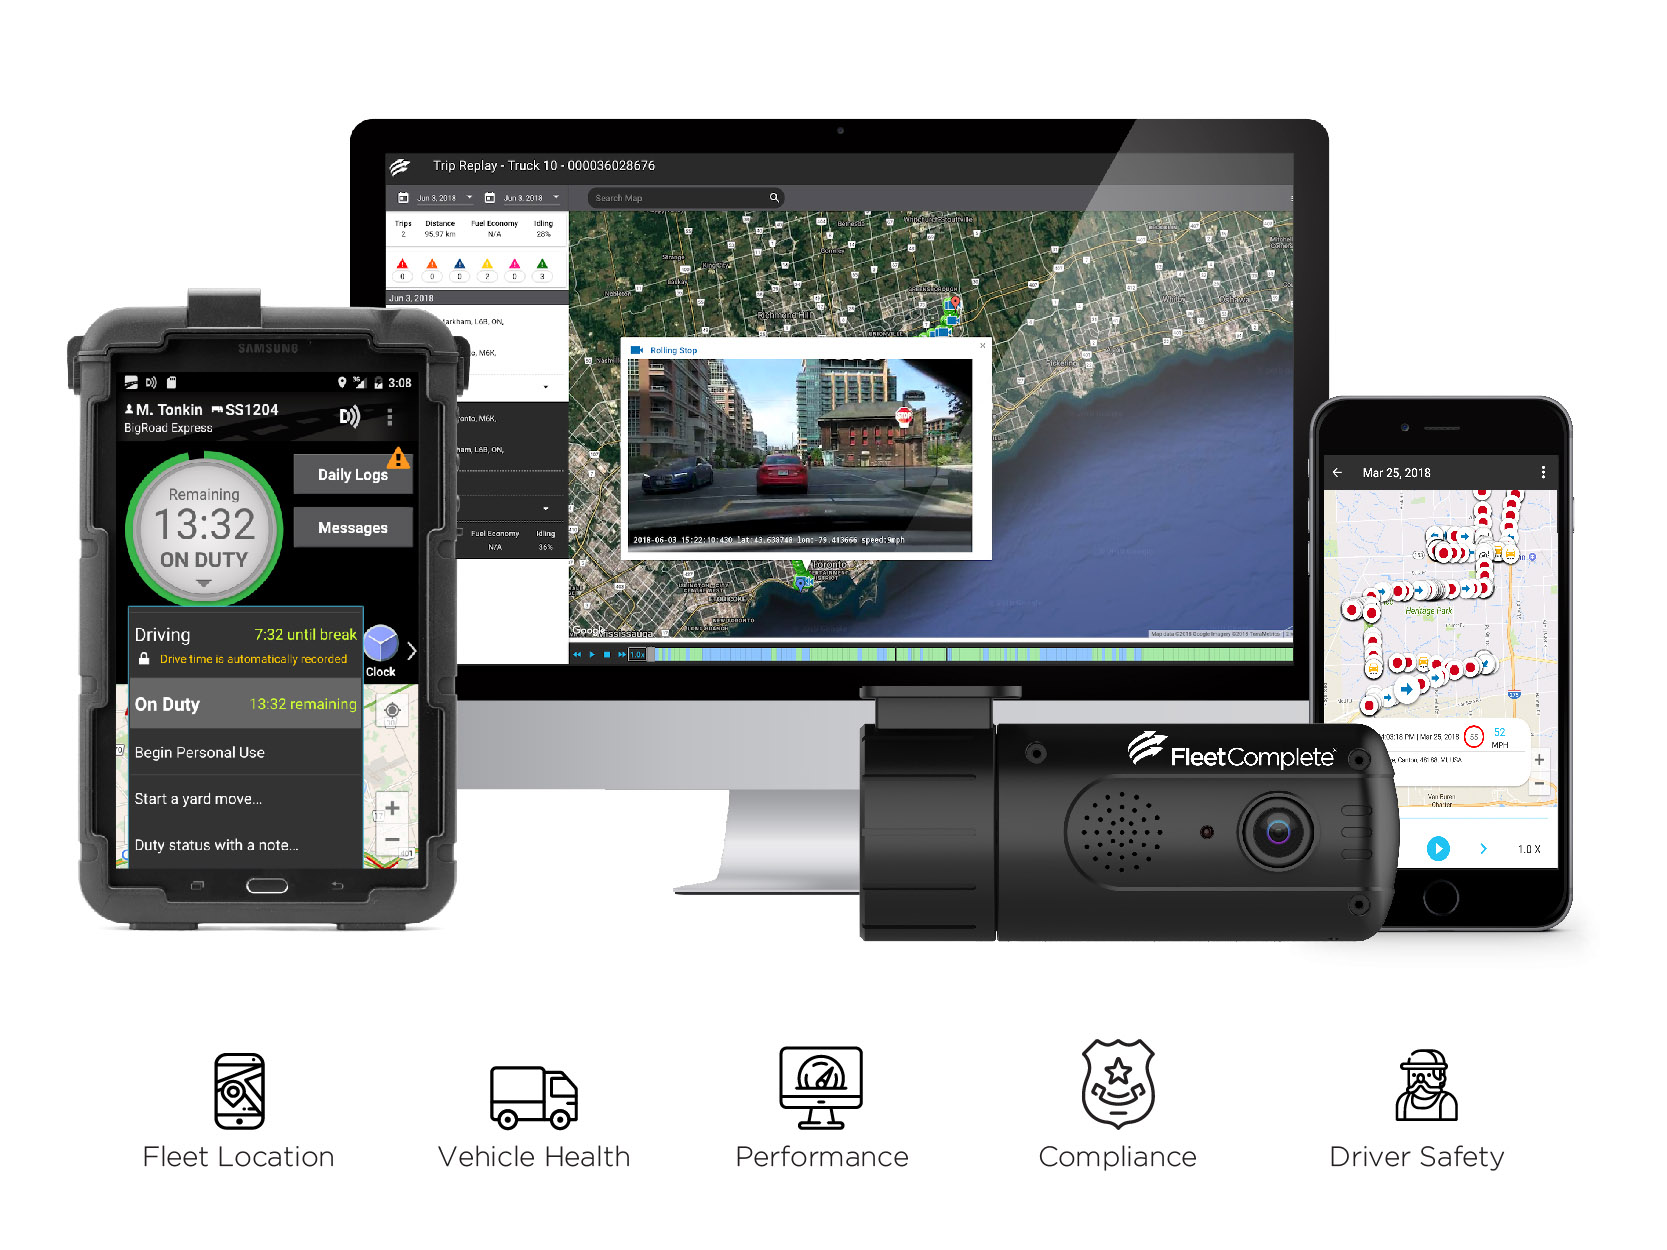 The Ultimate Bundle includes GPS, Dashcam, ELD, web and mobile app